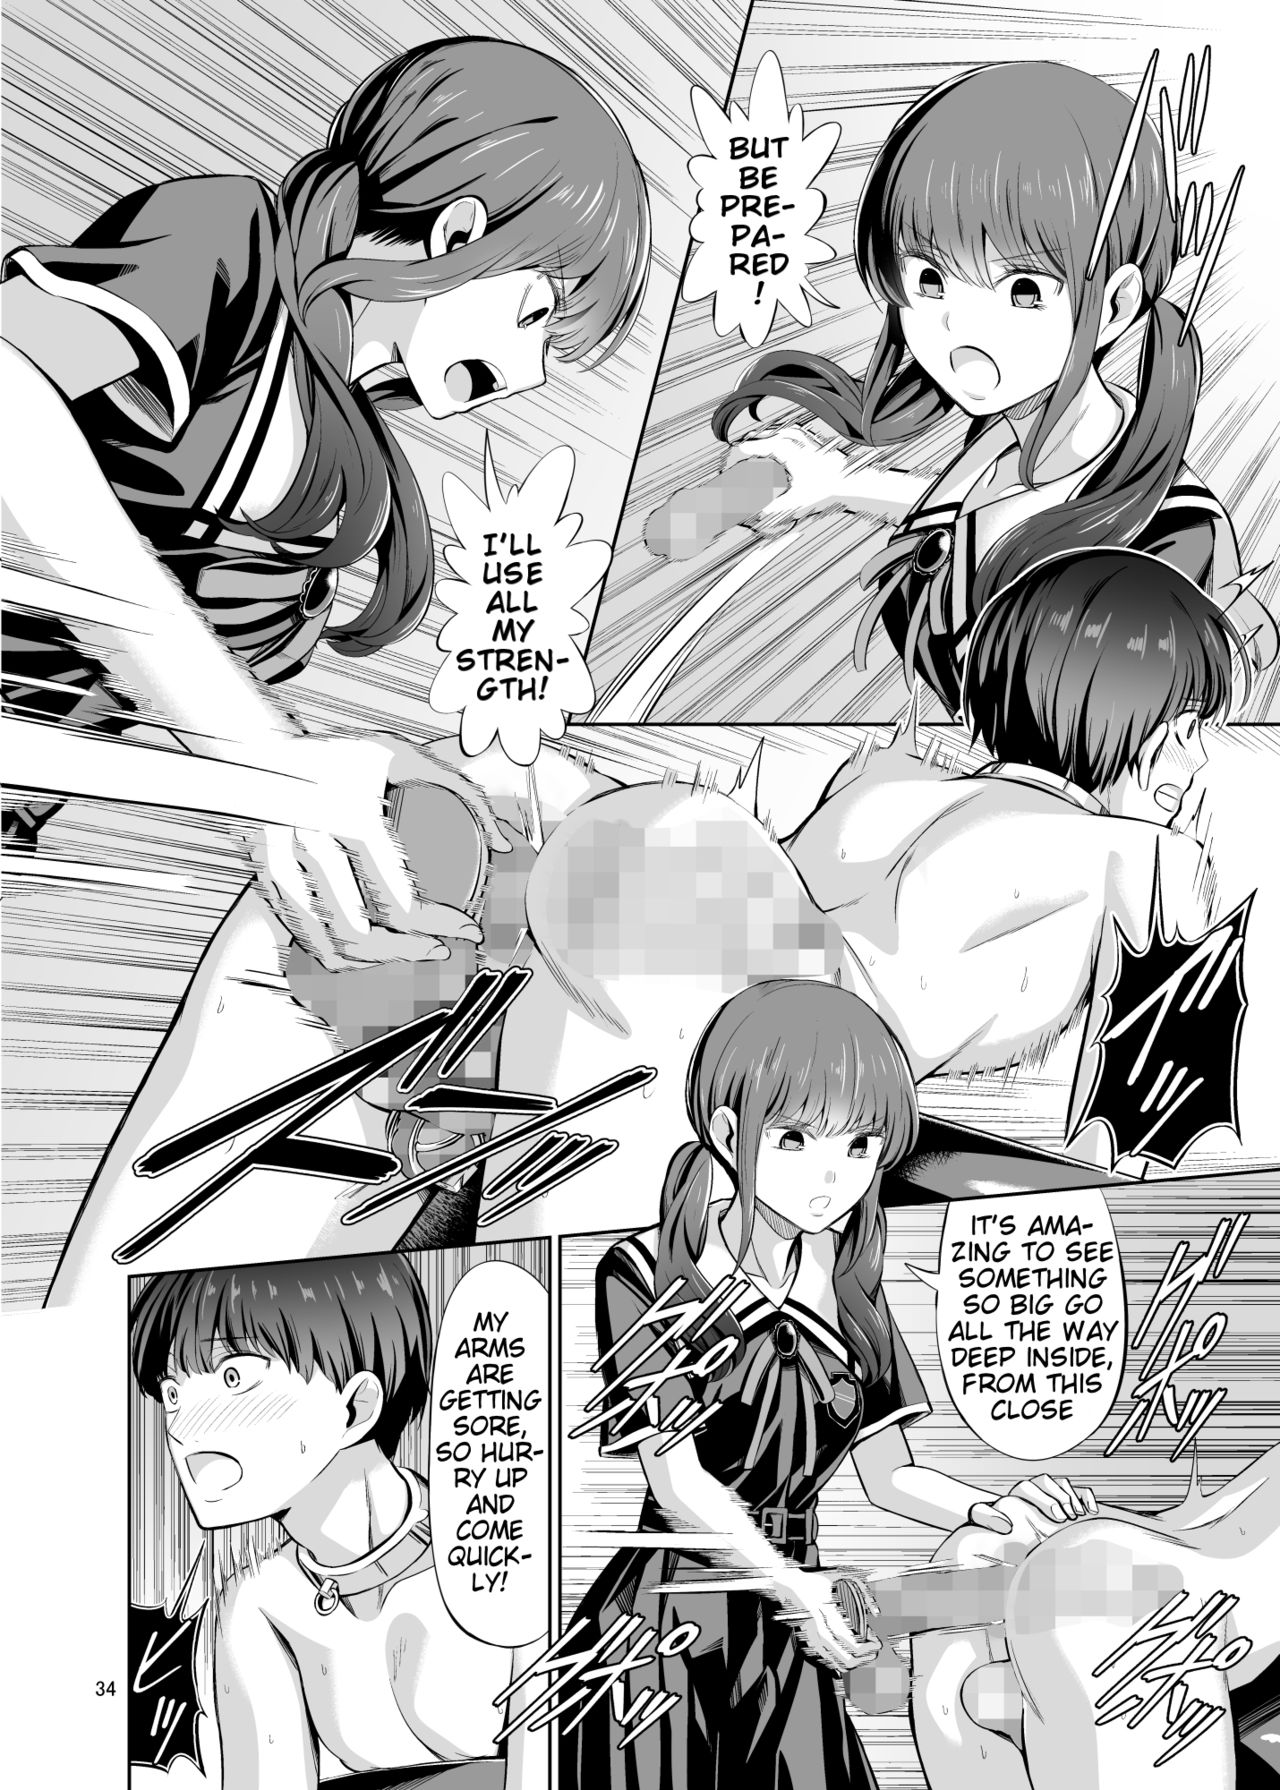 [Yamahata Rian] Tensuushugi no Kuni Kouhen | A Country Based on Point System Sequel [English] [Esoteric_Autist, klow82] page 36 full